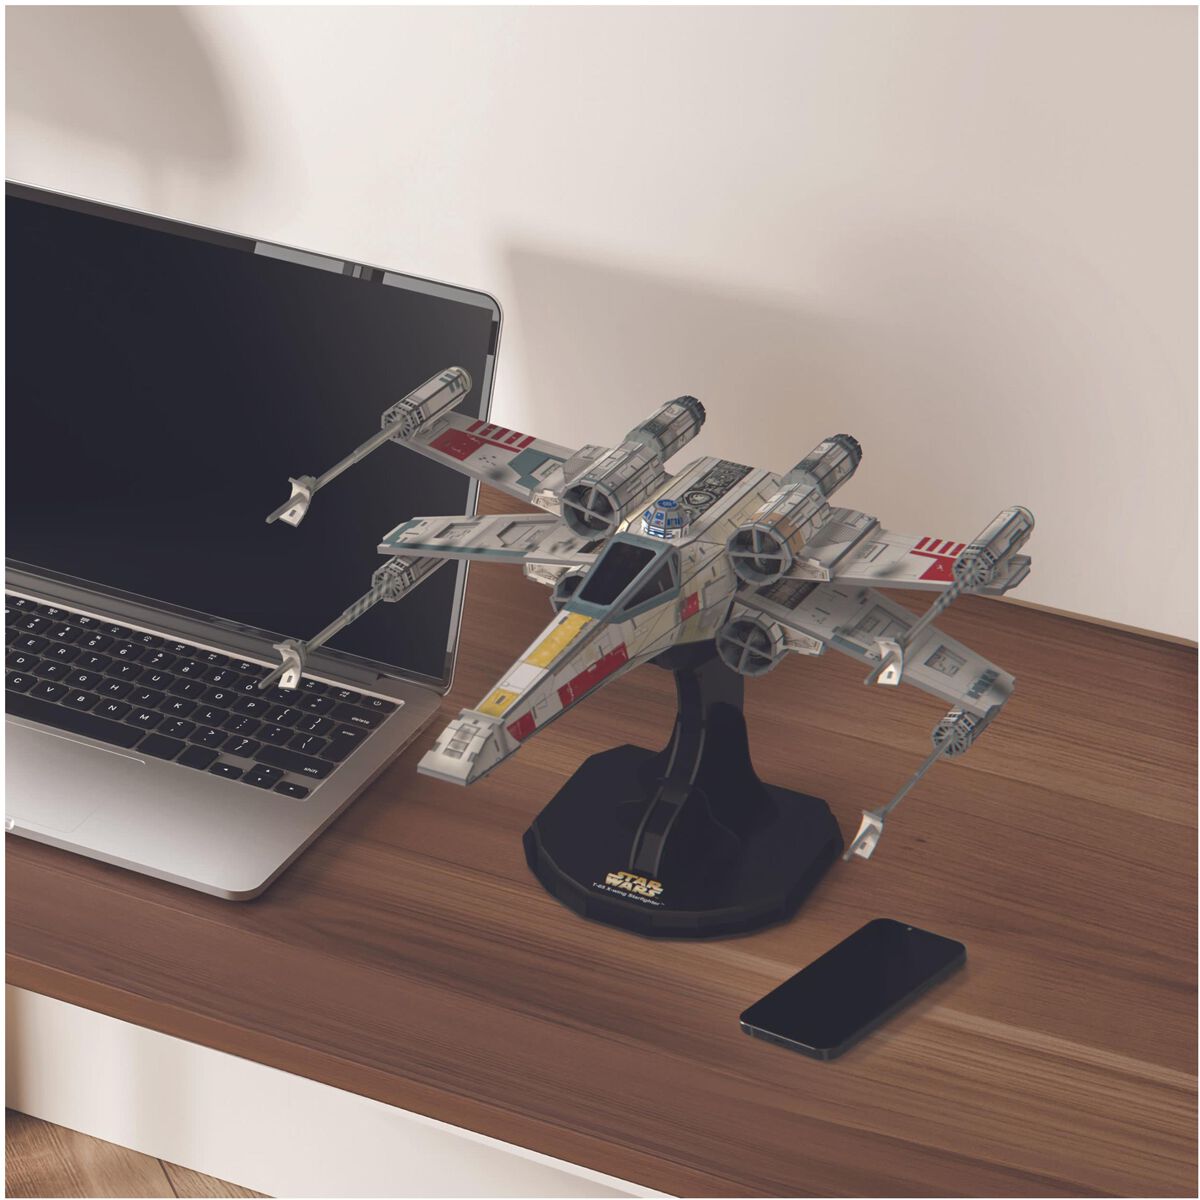 4D Build - X-Wing, Star Wars Puzzle